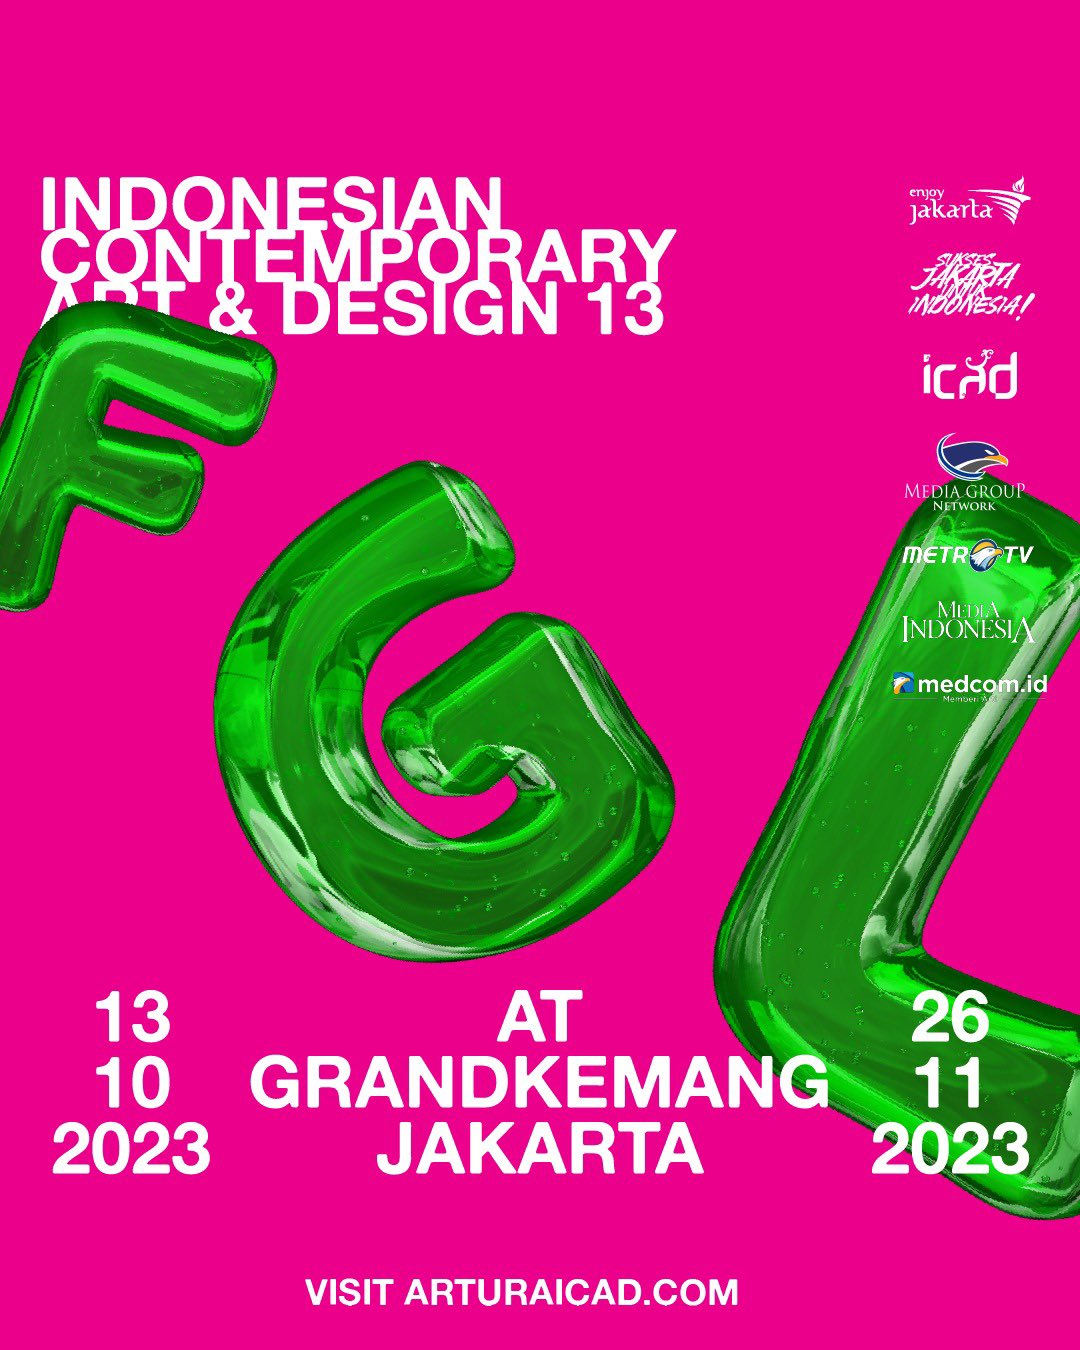 ICAD (Indonesian Contemporary Art and Design) 13